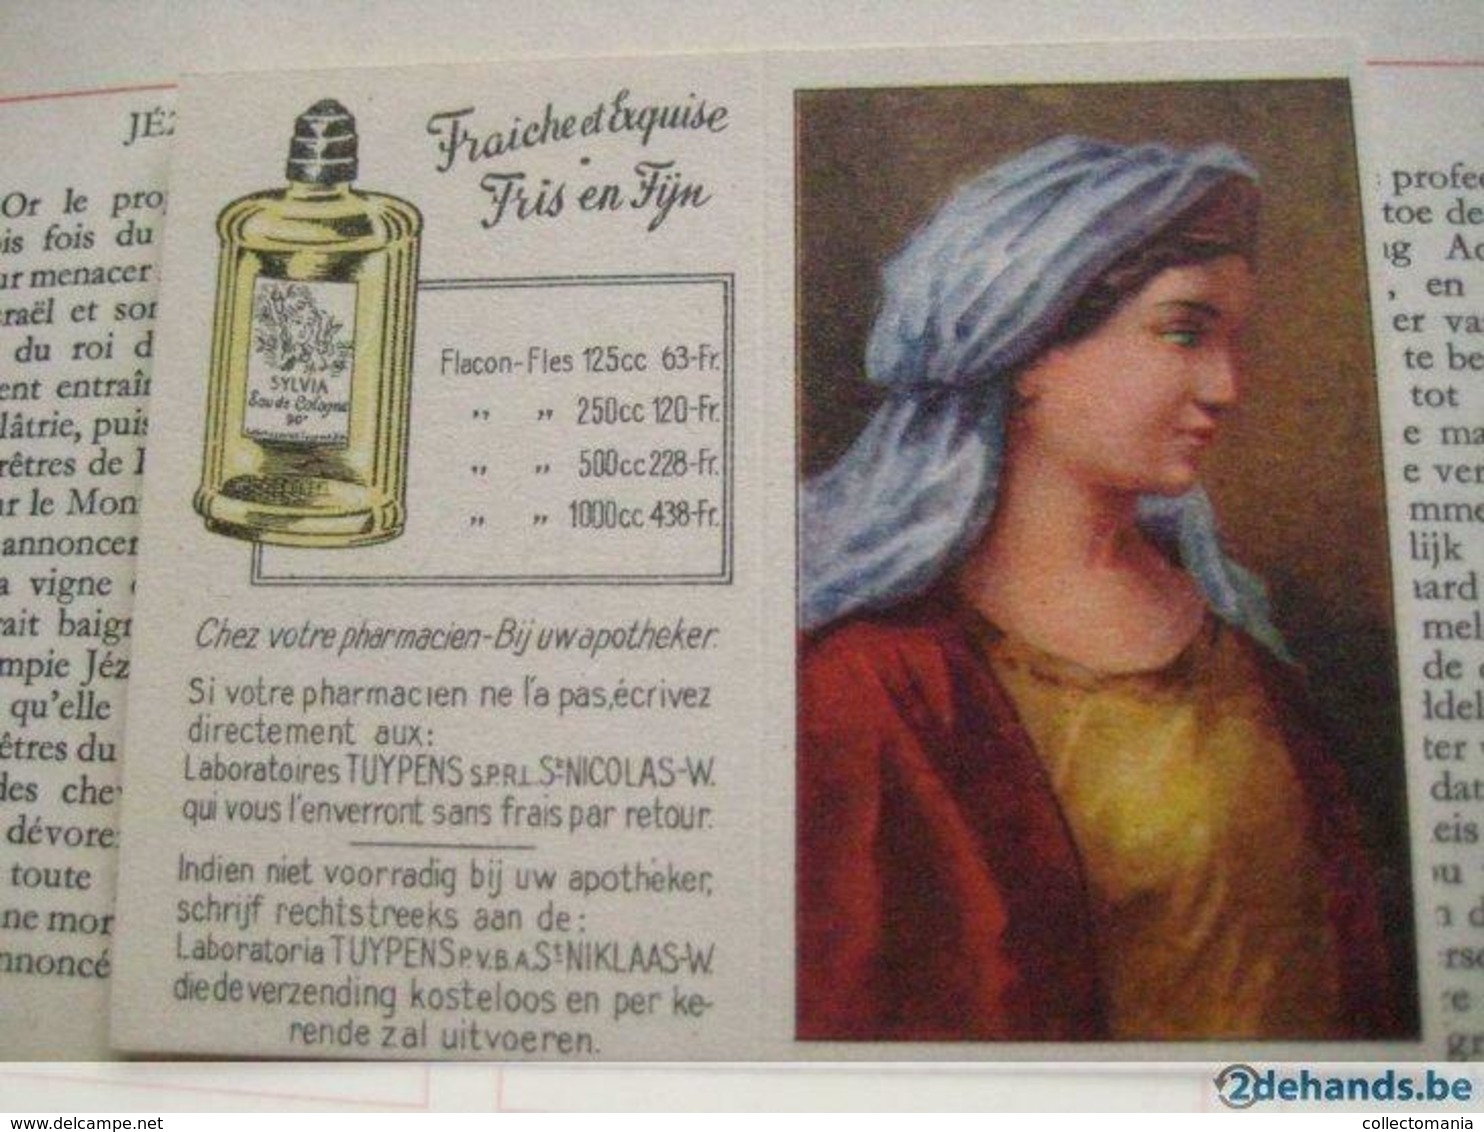 1 album Laboratoires TUYPENS , 1950'sRare & nice, woman famous in history, album splendid, only 10 cards to glue in RARE